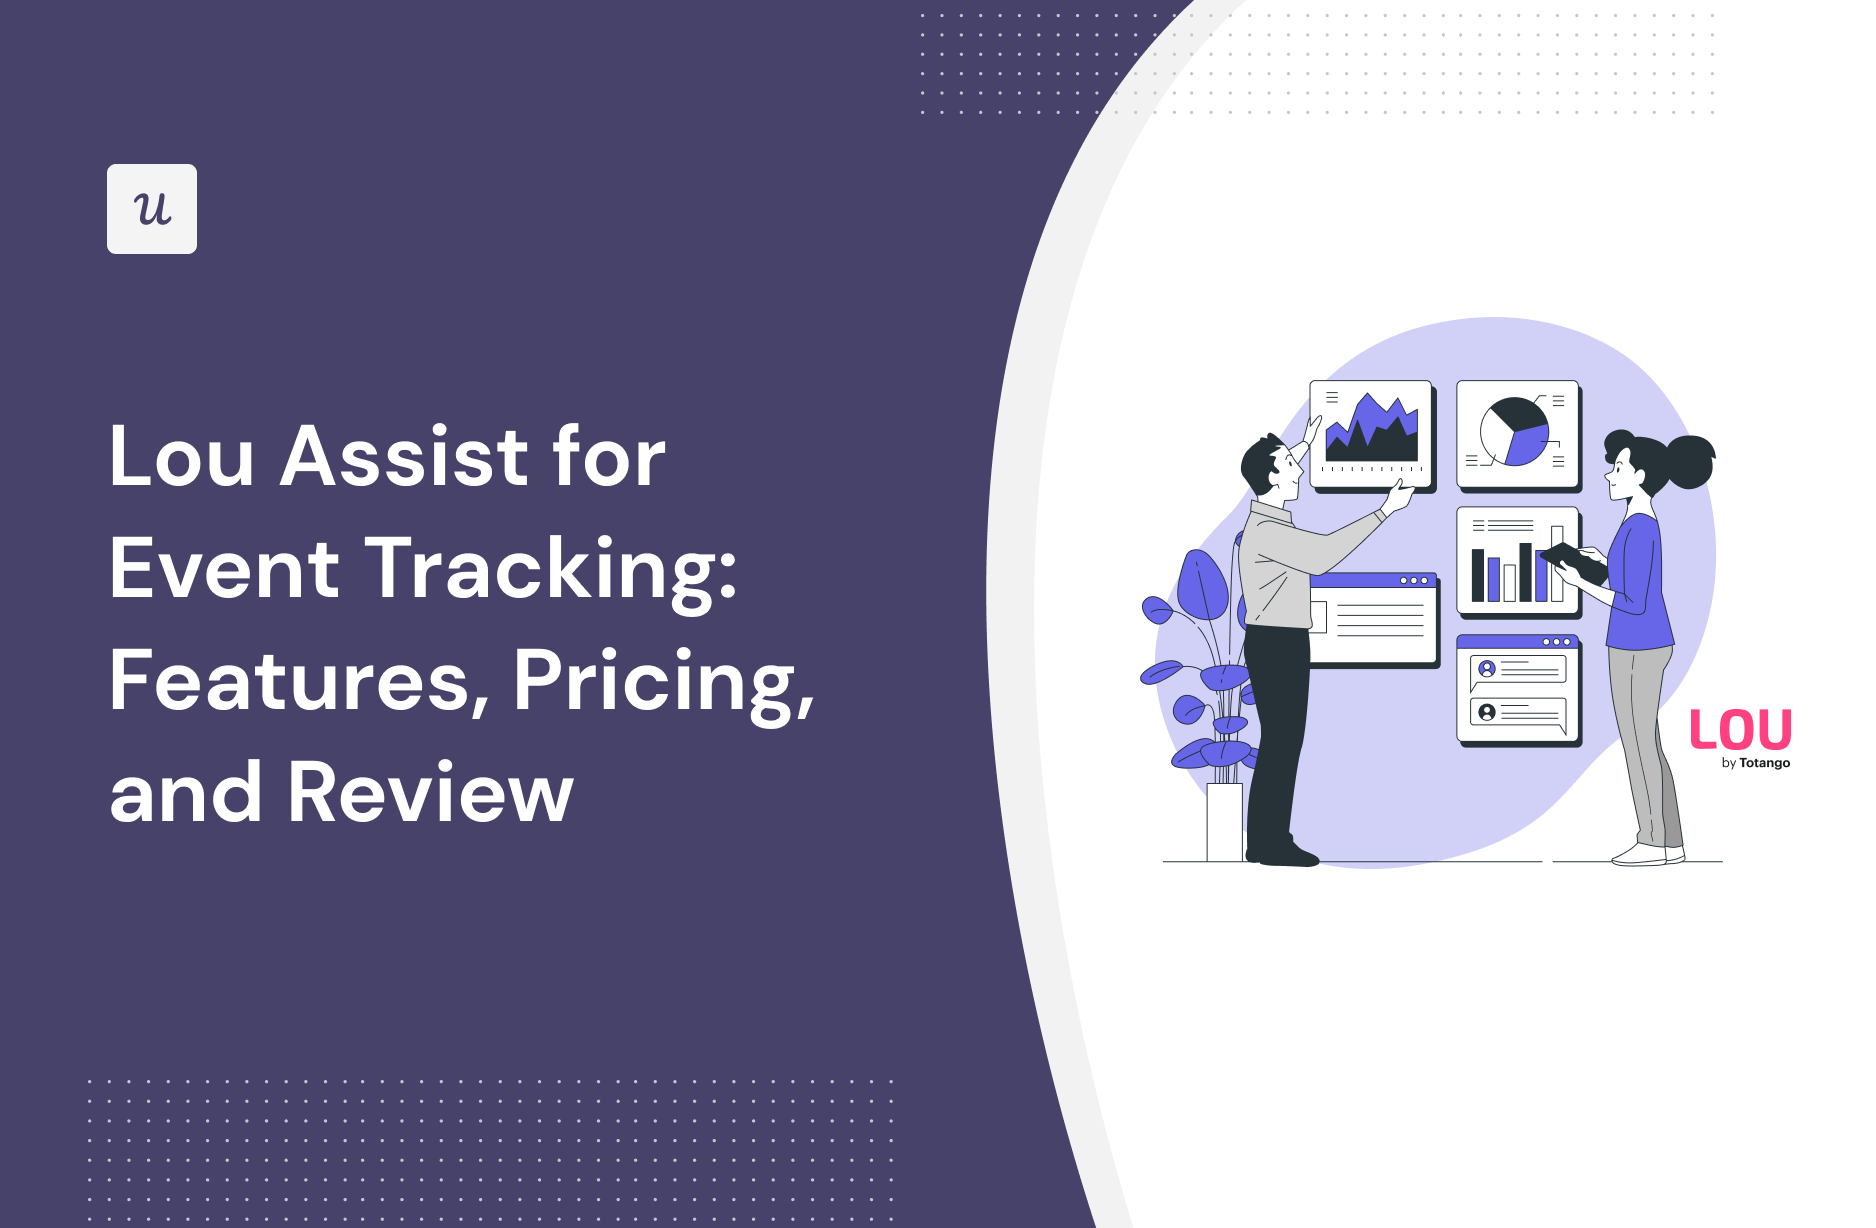 Lou Assist for Event Tracking: Features, Pricing, and Review